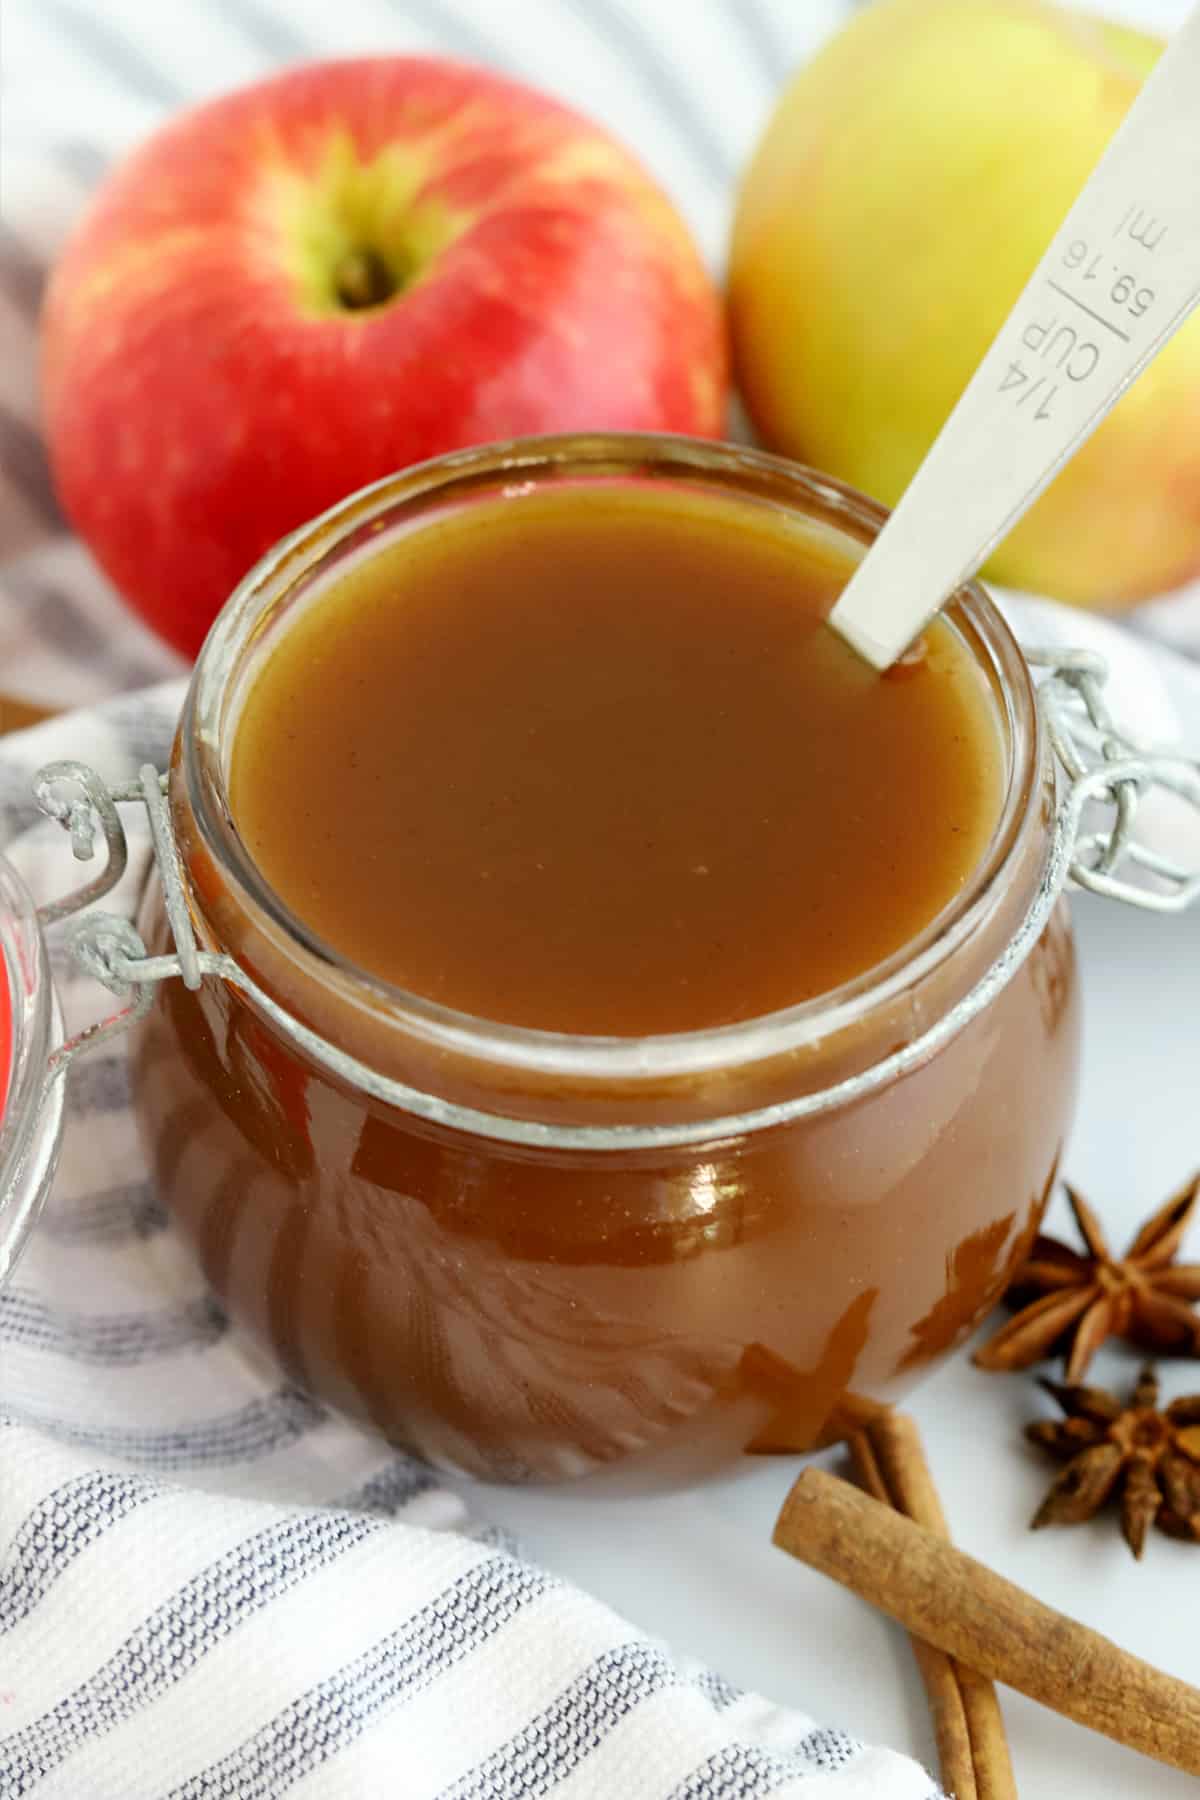 How to Make Apple Cider Syrup? 